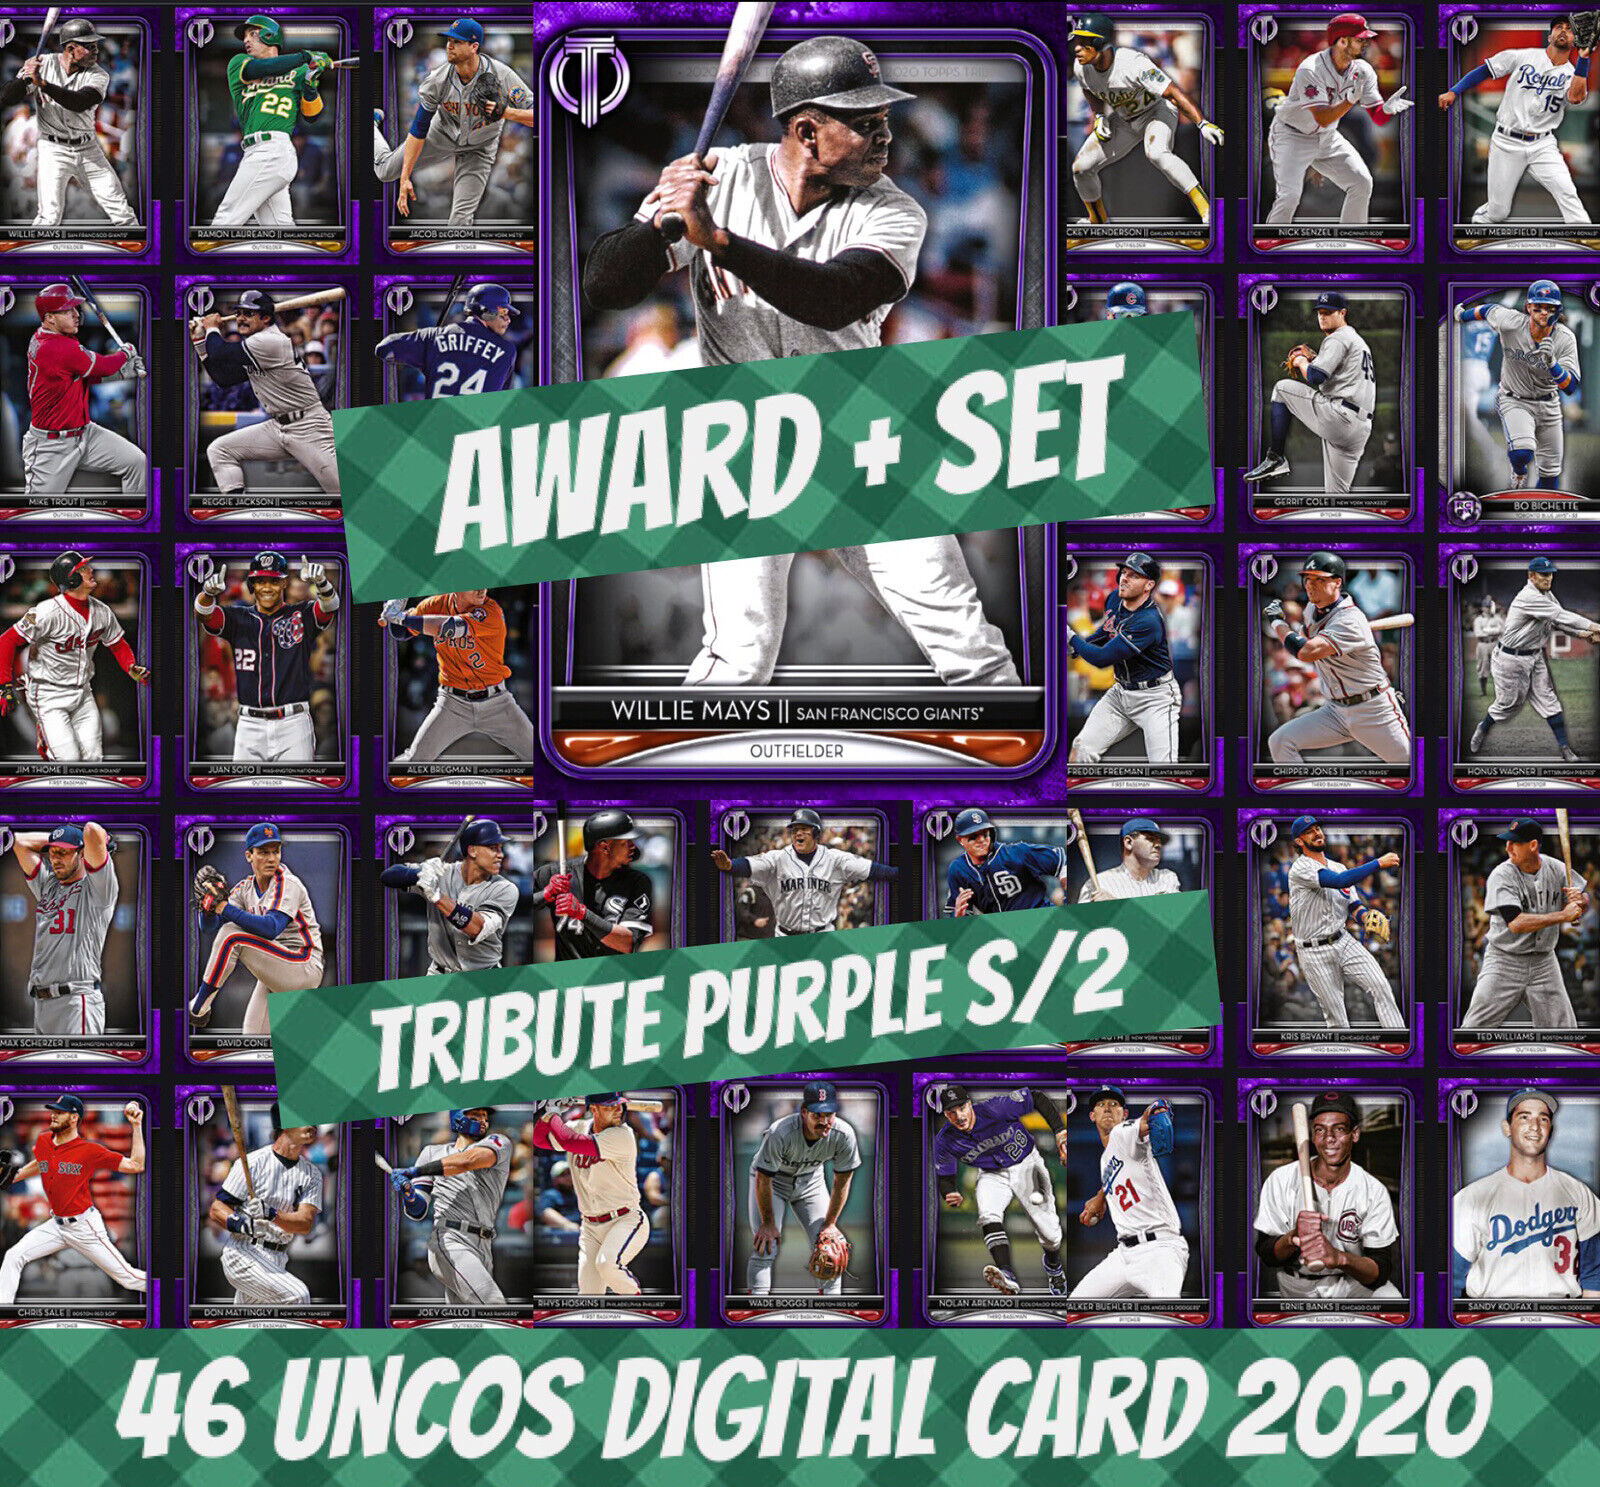 2020 Topps Colorful 20 Willie Mays Award + Set (1+45) Tribute S/2 Purple Digital